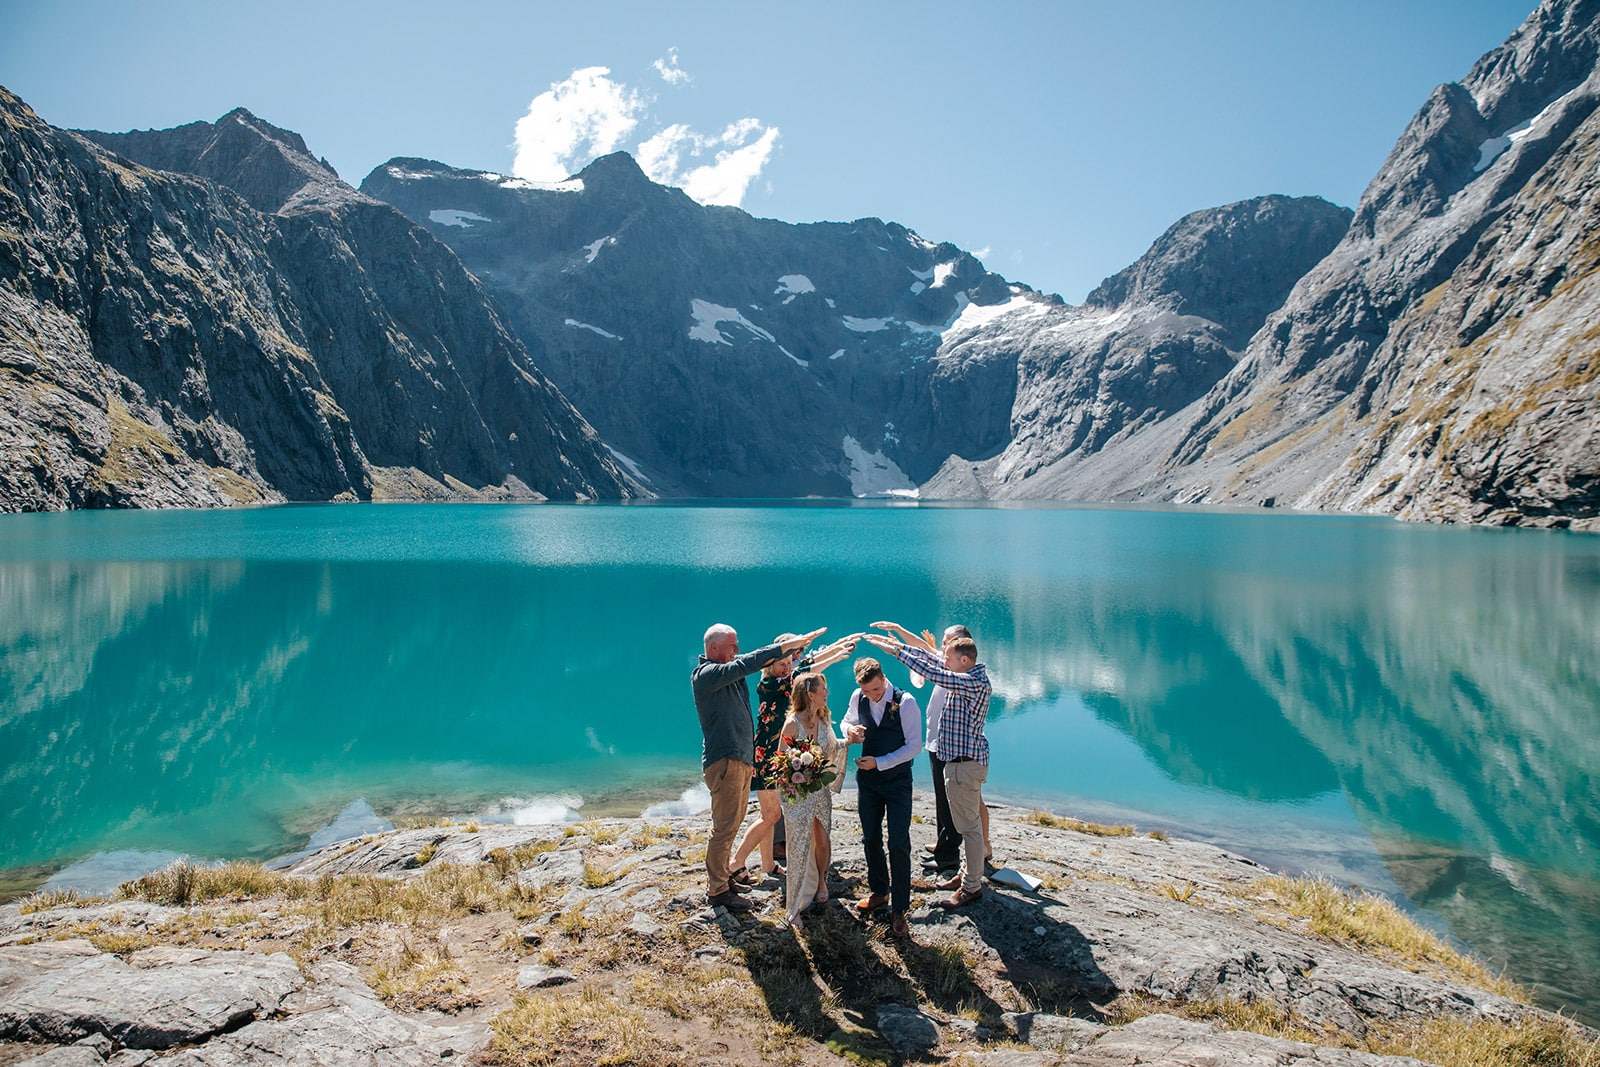 Adventure Wedding with Helicopter at Lake Erskine in Queenstown New Zealand